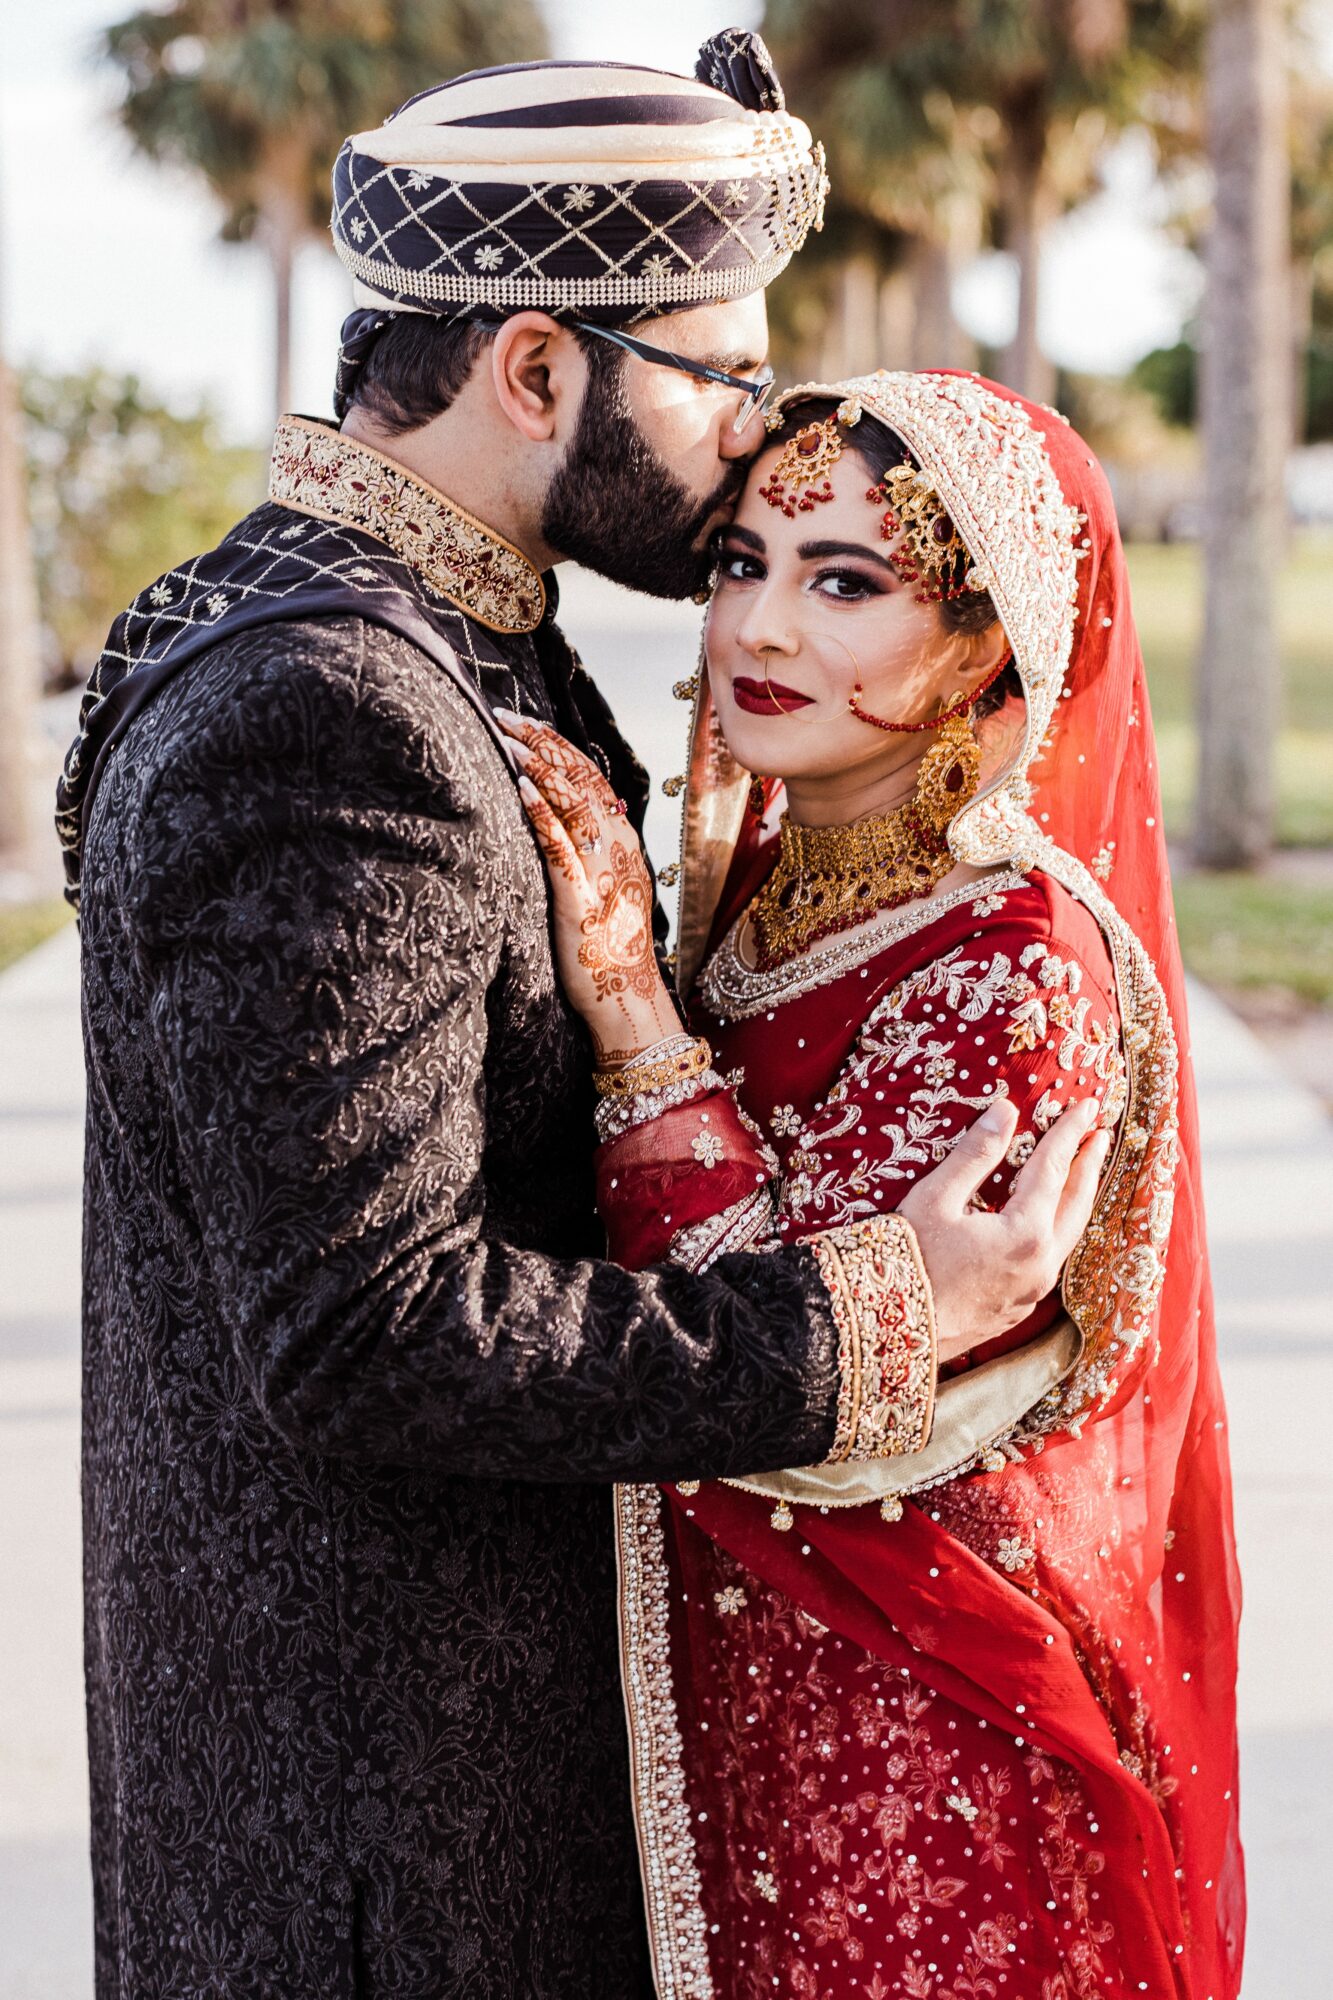 I would wish you a happy marriage, but I am confident you two will have t…  | Indian wedding couple photography, Indian bride photography poses, Wedding  couple poses